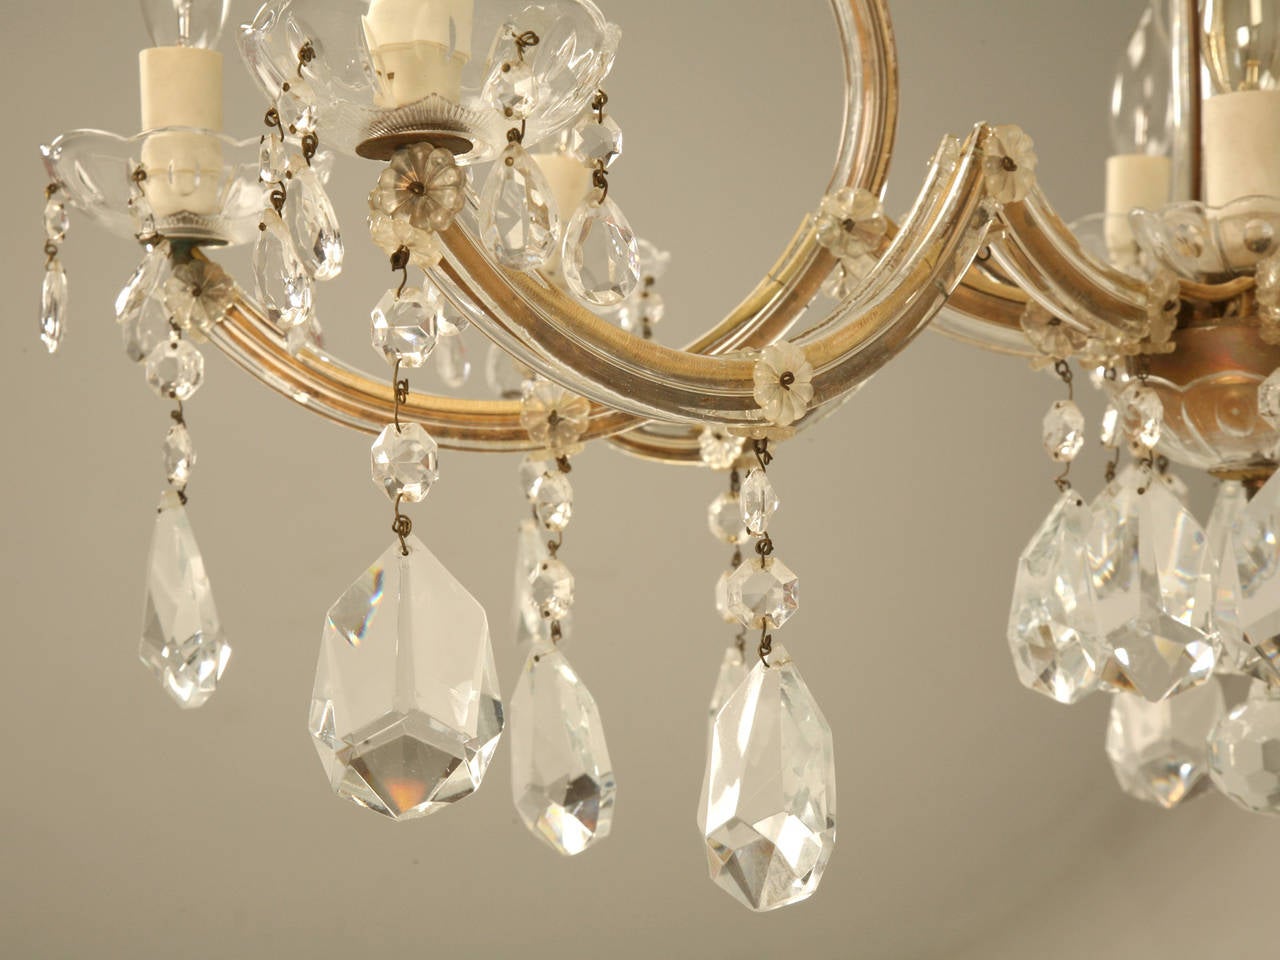 Mid-20th Century Spanish Chandelier in a Baroque Style, Brass and Crystal circa 1930s For Sale